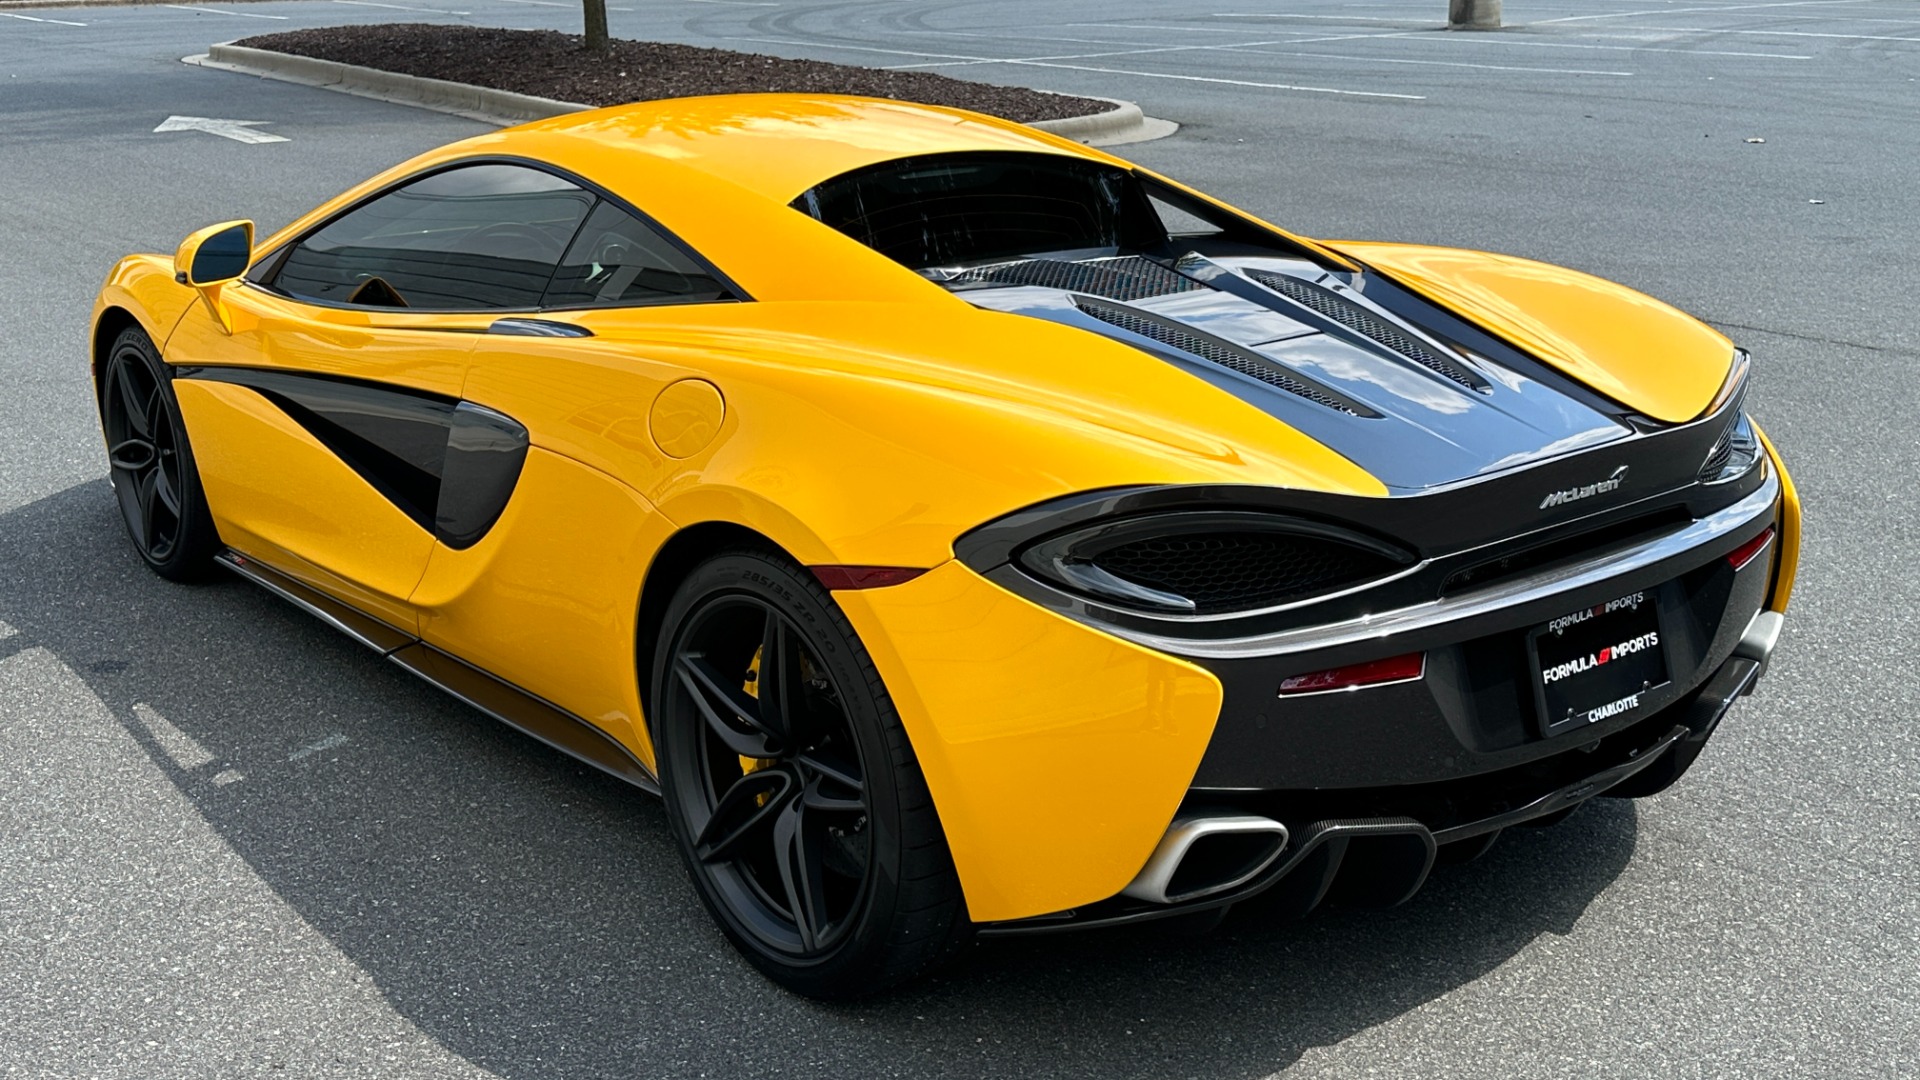 Used 2016 McLaren 570S COUPE / FULL PAINT PROTECTION / NEW TIRES / VOLCANO YELLOW for sale $156,995 at Formula Imports in Charlotte NC 28227 7